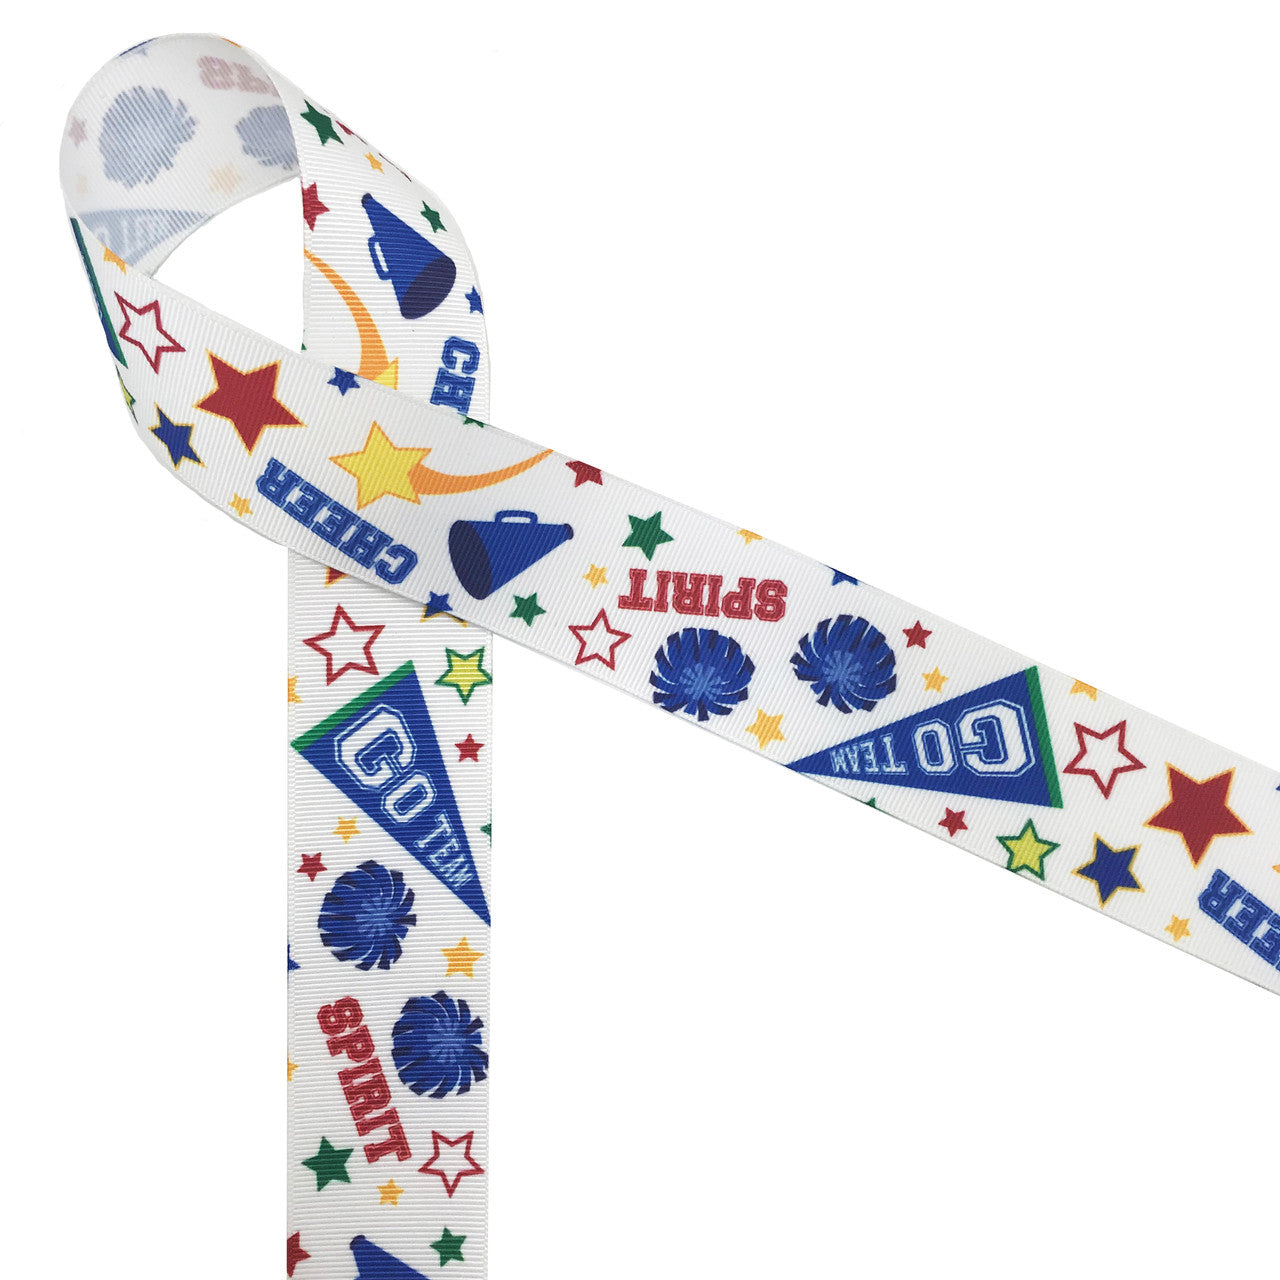 Cheerleading ribbon with fun colors and elements of the sport! Make this cheer ribbon part of the game!